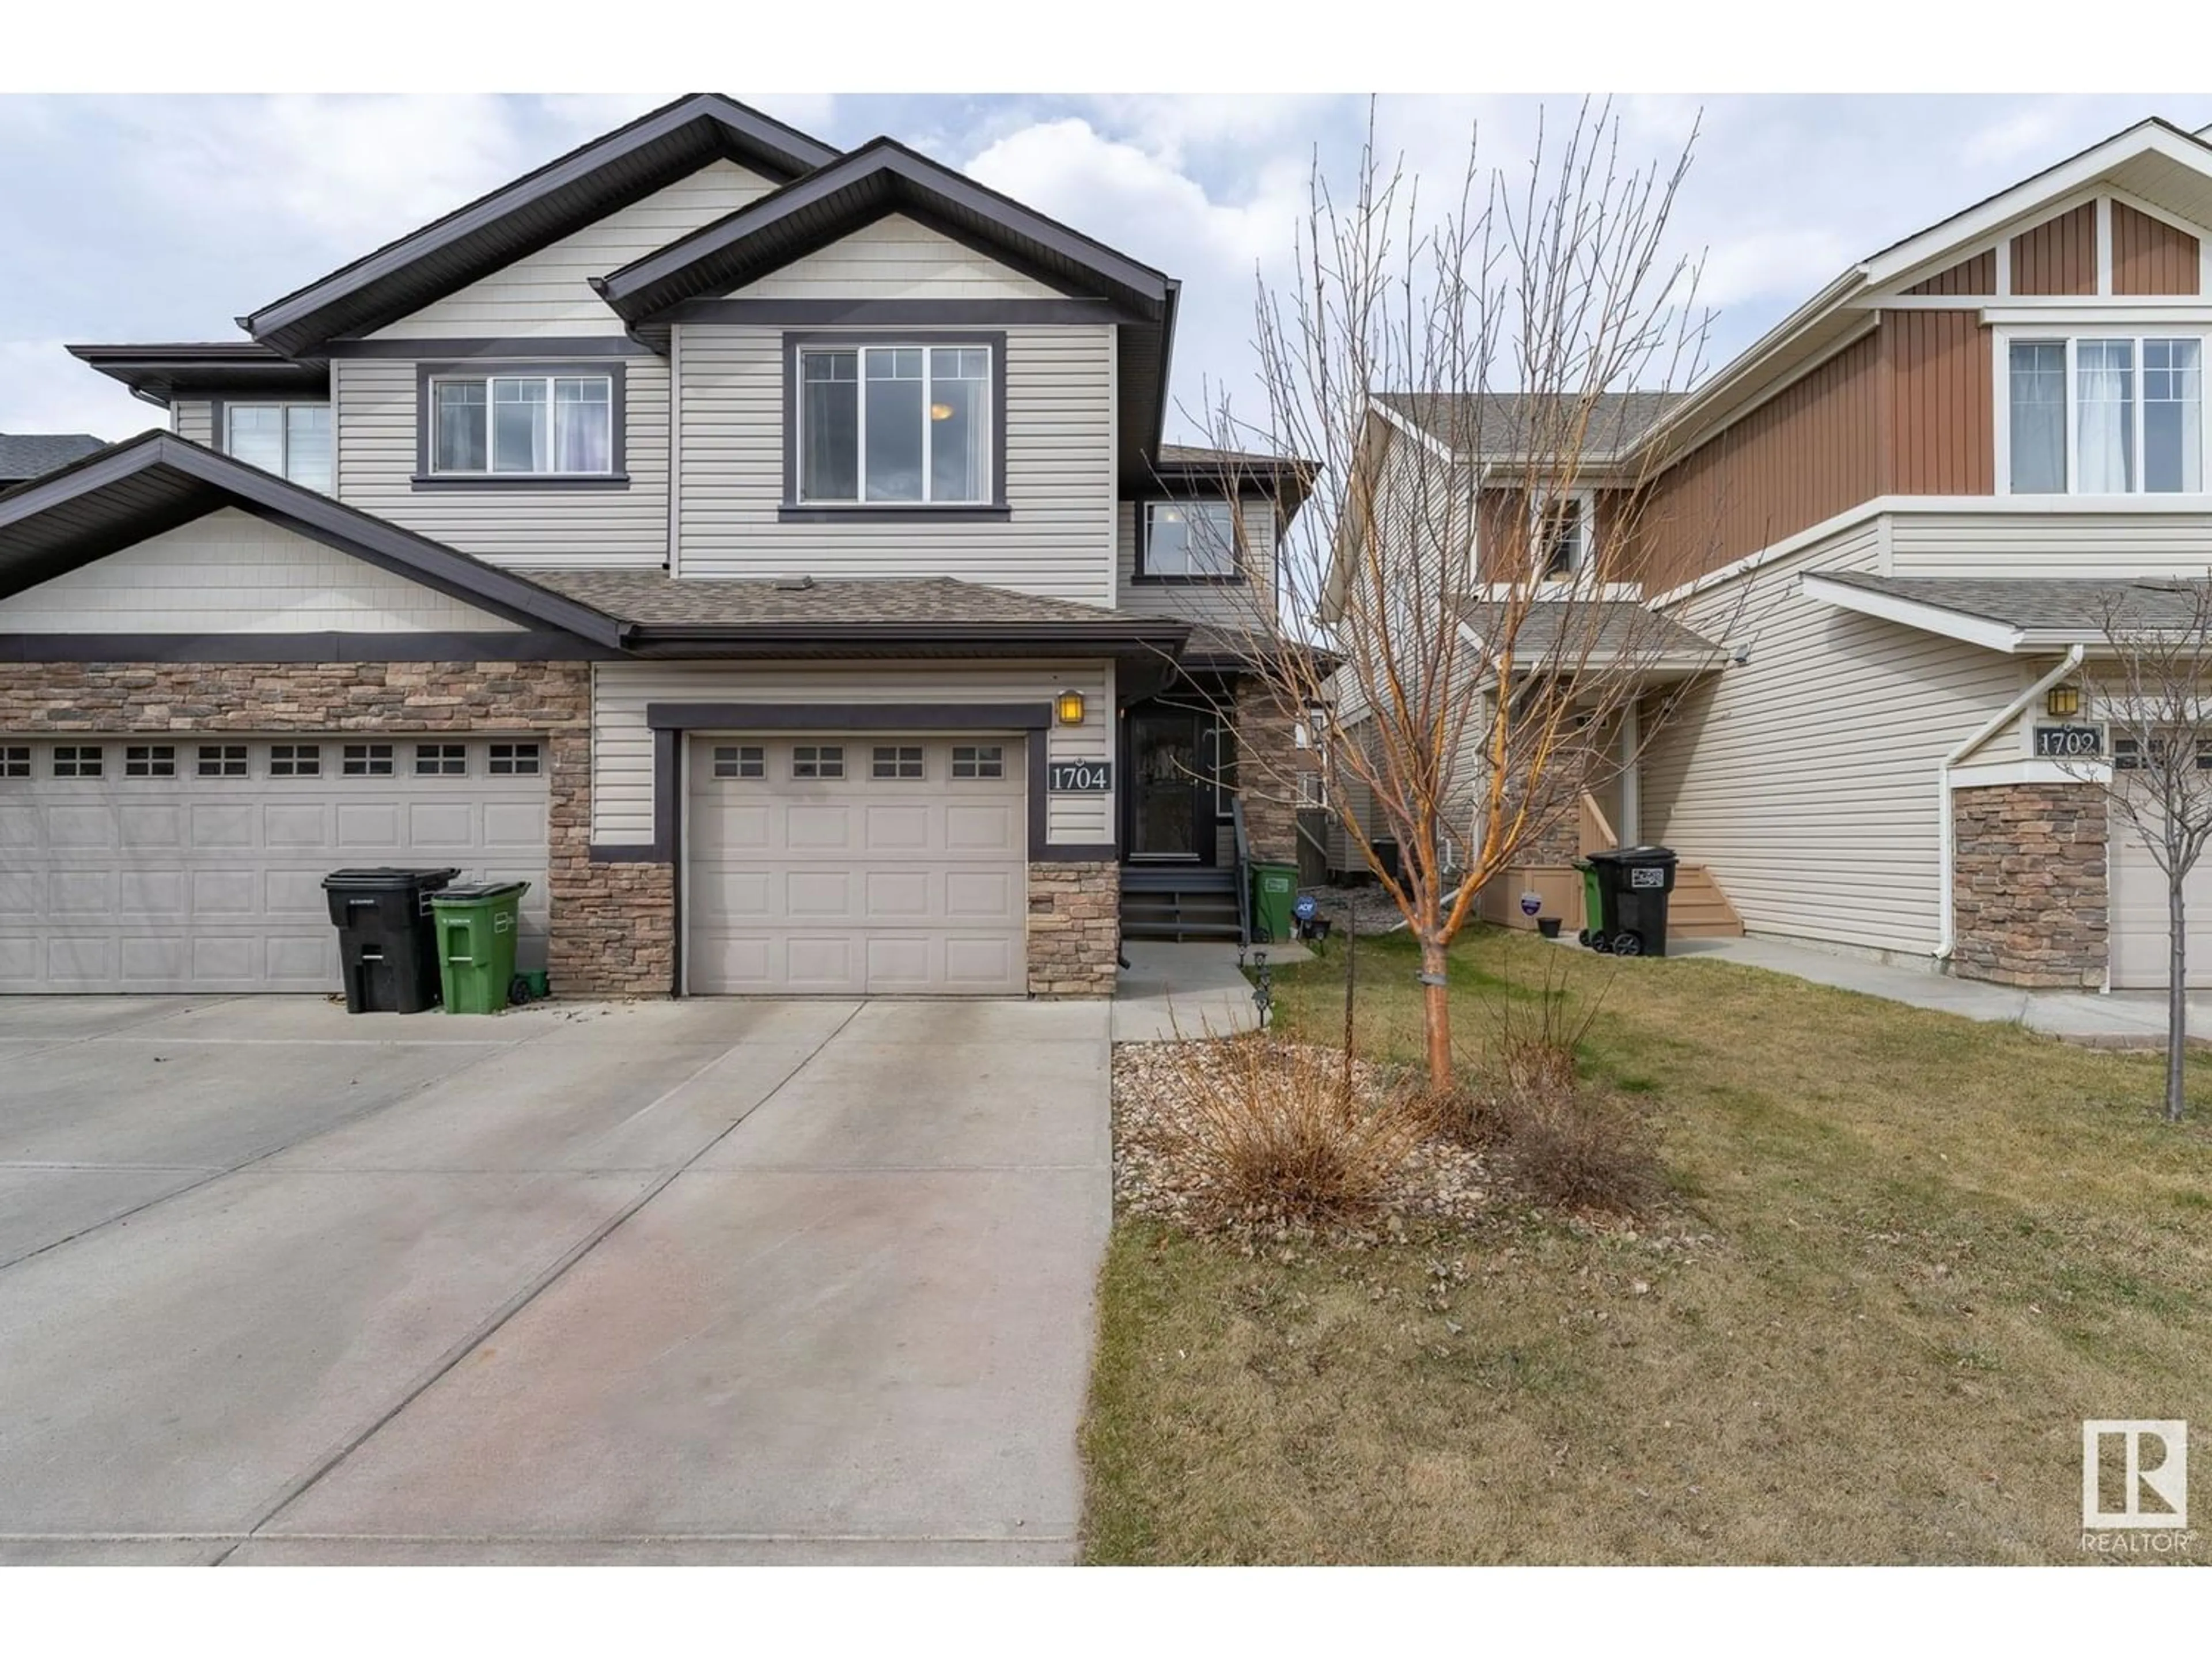 A pic from exterior of the house or condo for 1704 CUNNINGHAM WY SW, Edmonton Alberta T6W0W4